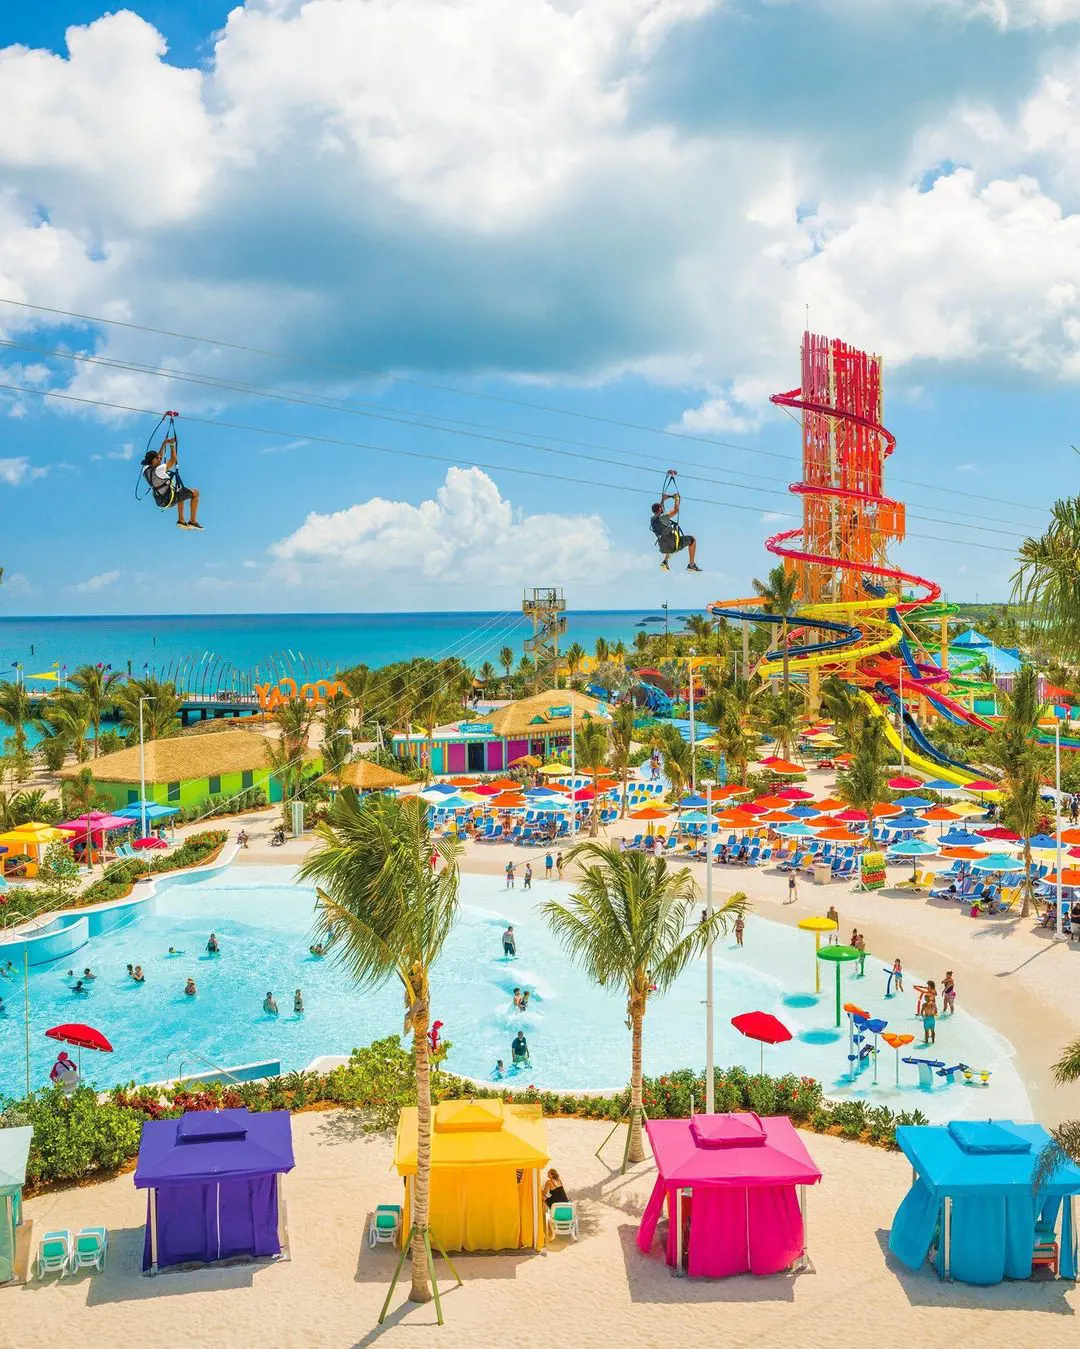 A Weekend trip to Coco Cay make your perfect day.